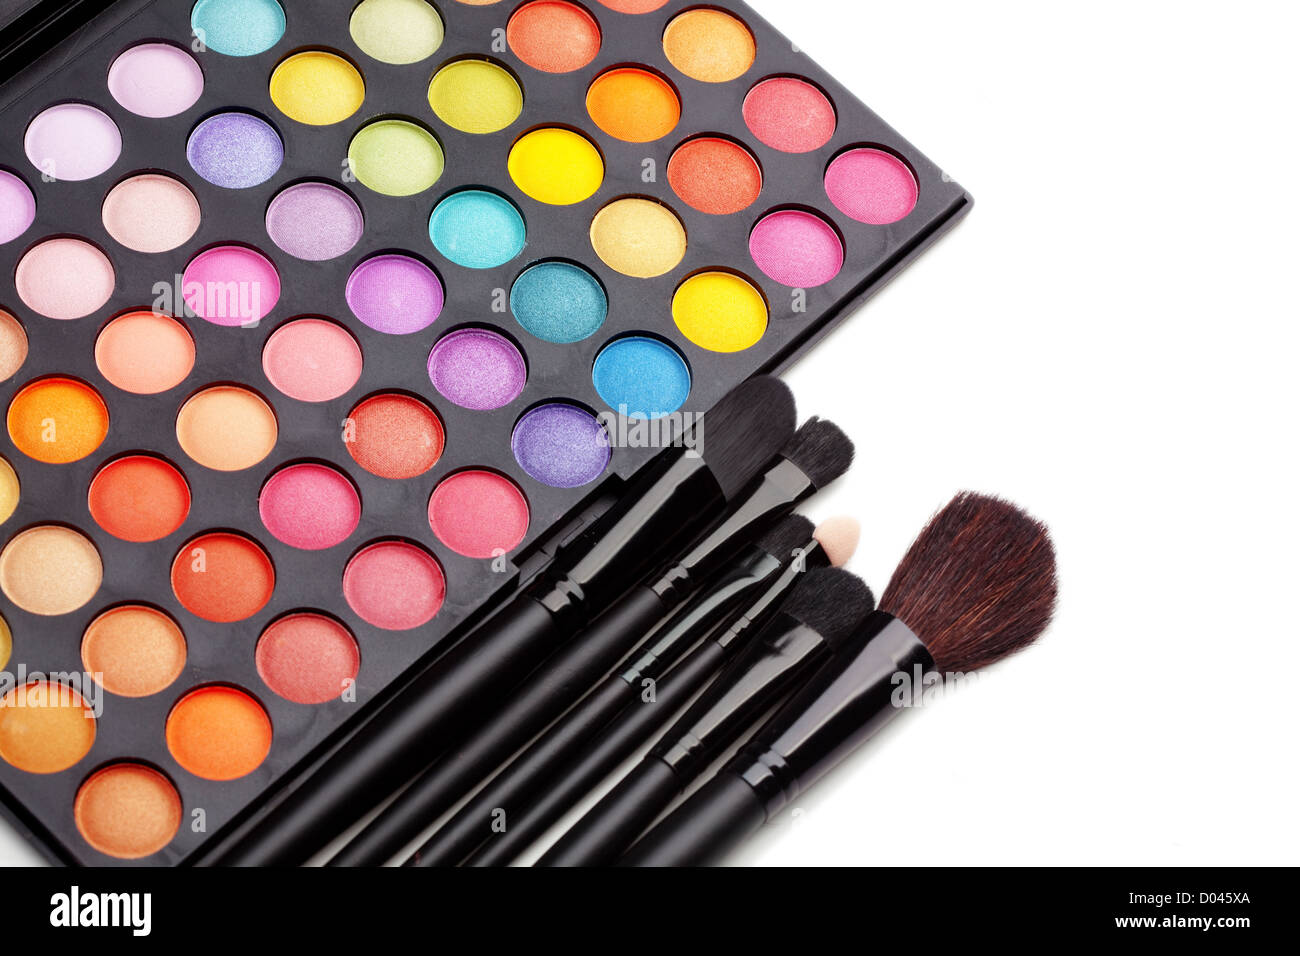 Make-up colorful eyeshadow palette with makeup brushes on it Stock Photo